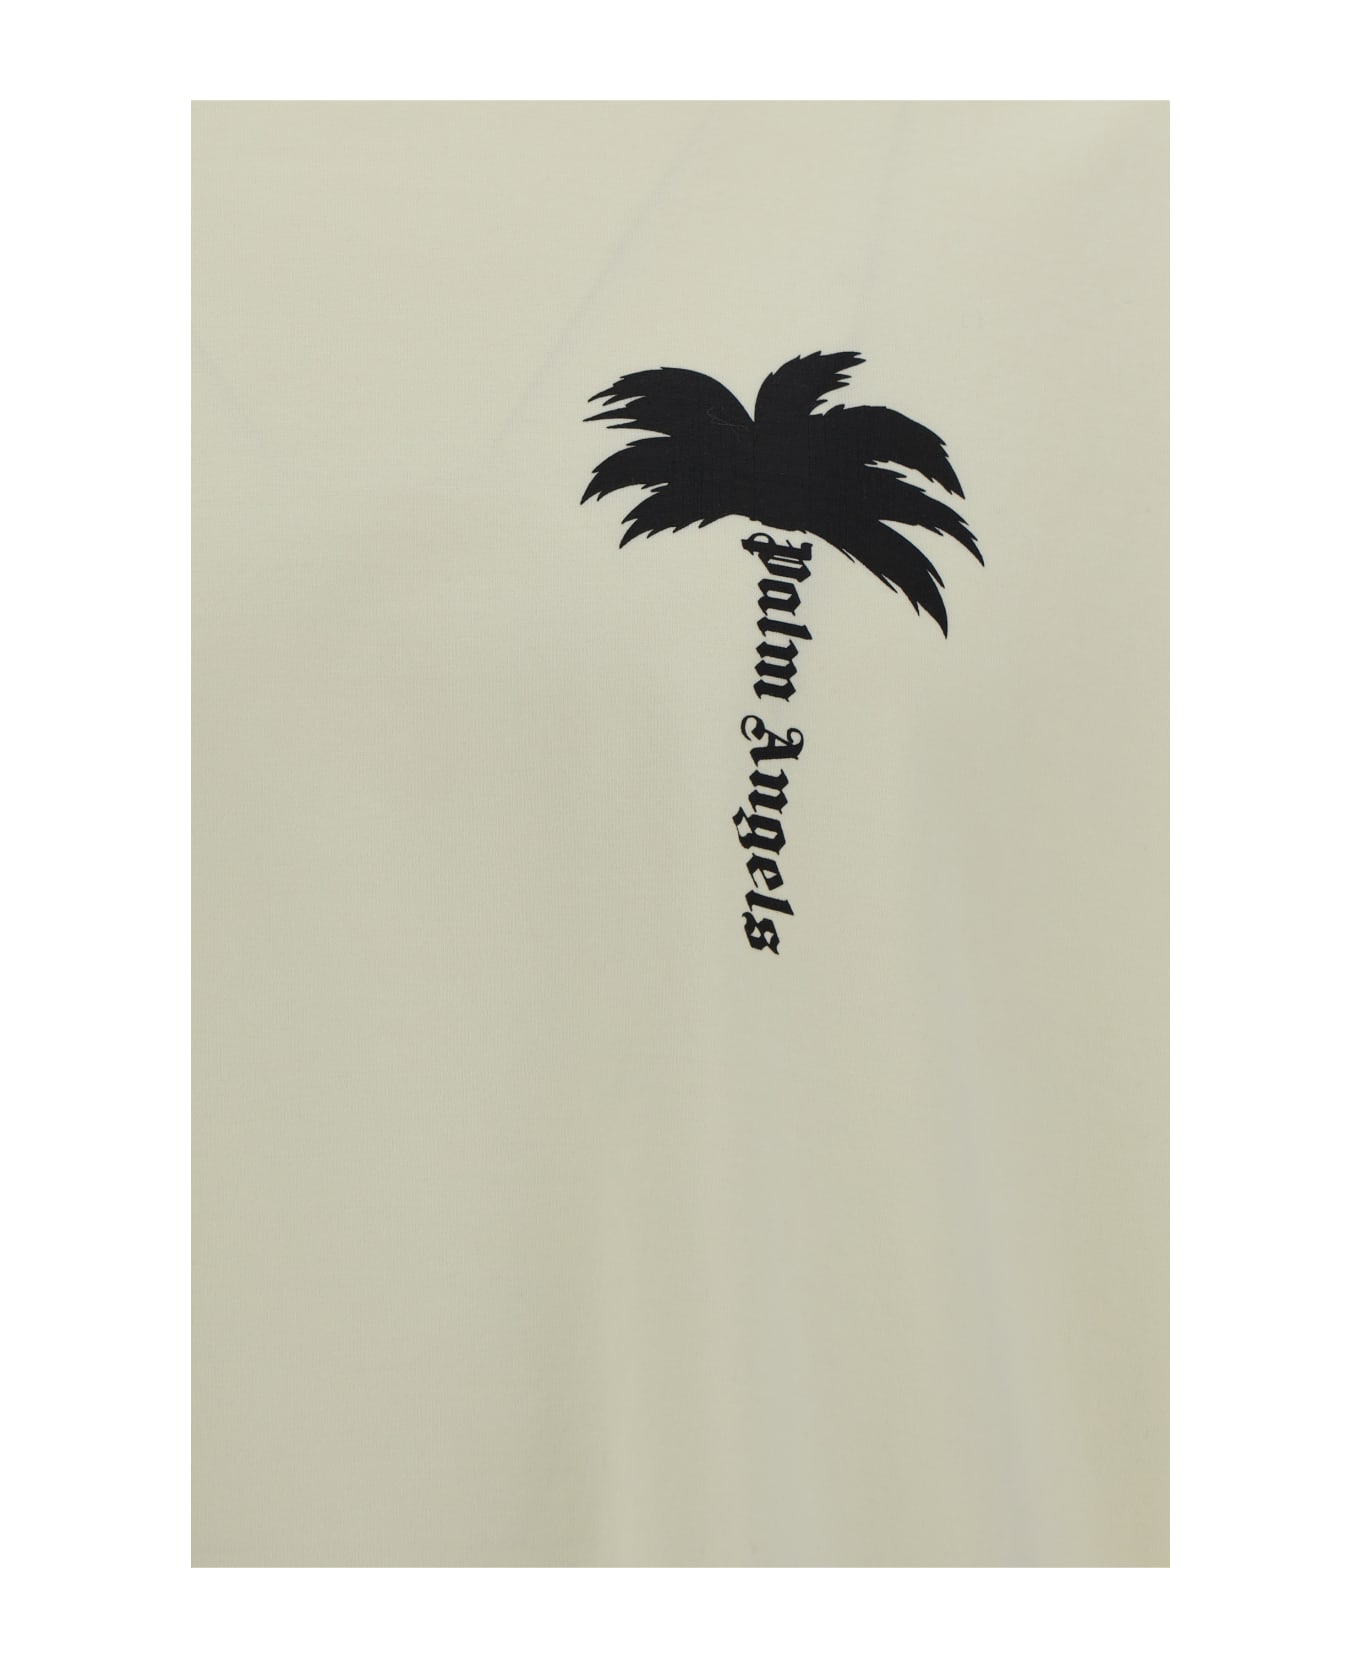 Palm Angels T-shirt With The Palm Logo - Off White Black シャツ